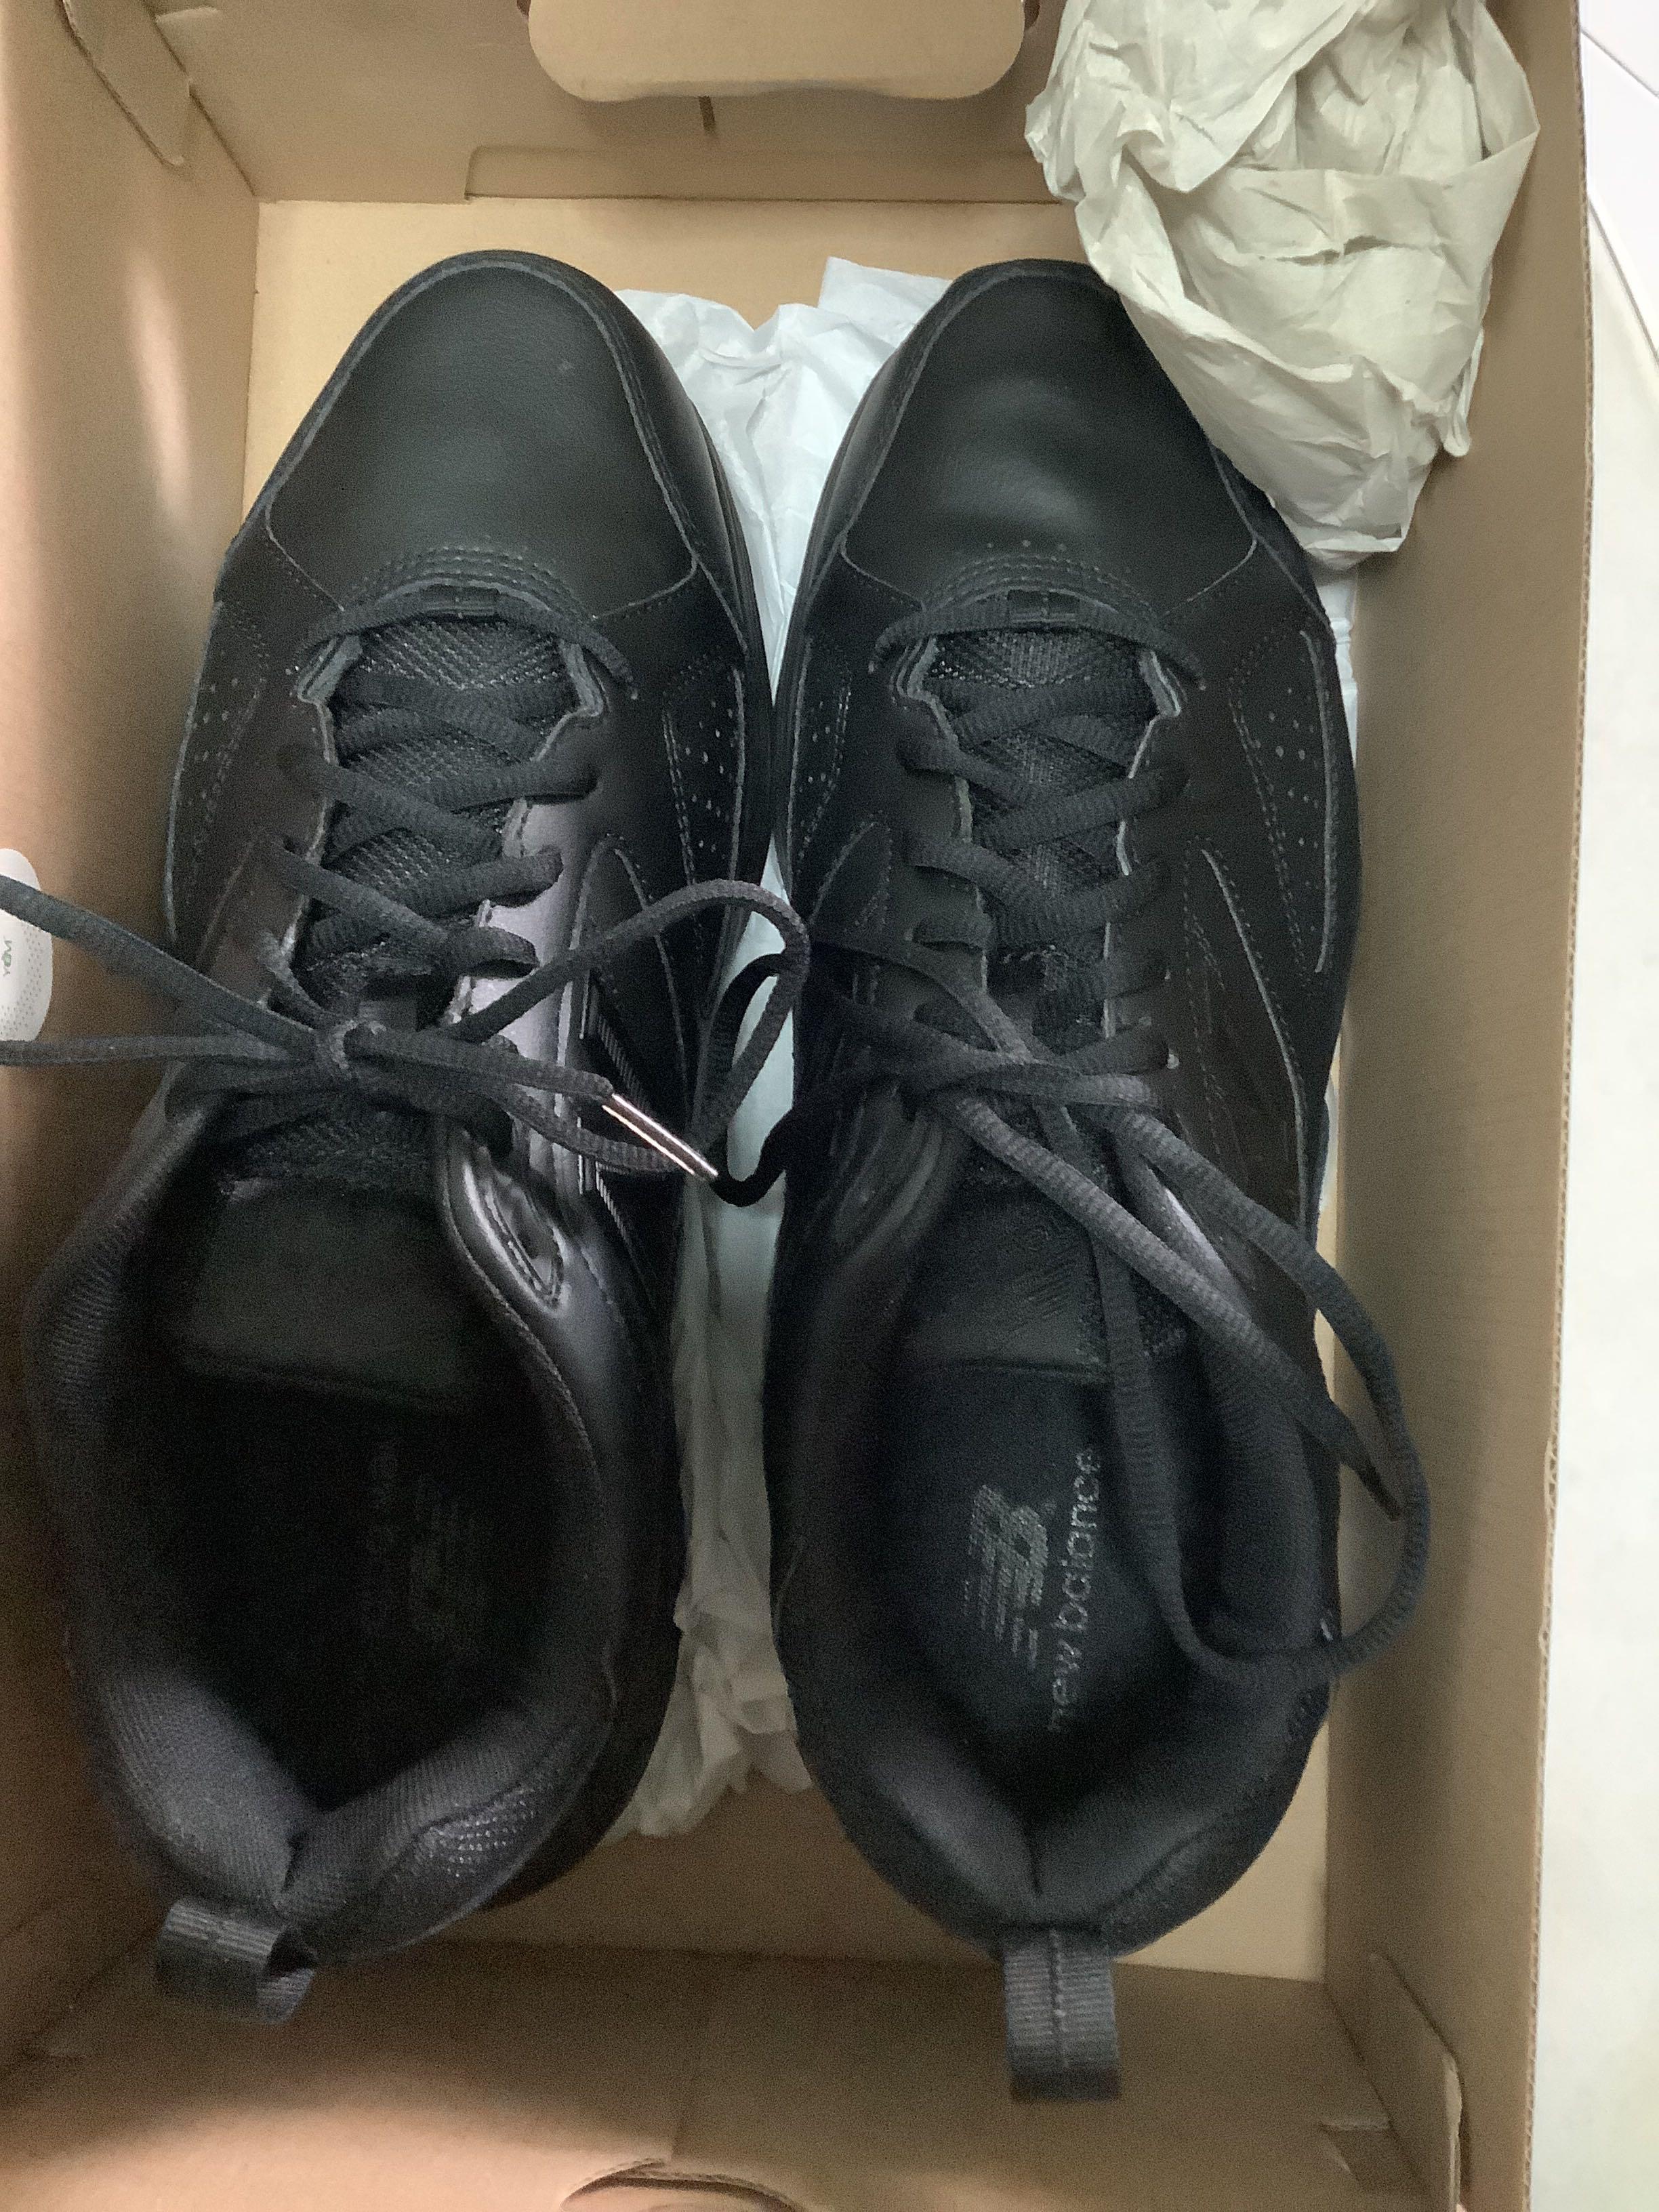 hypothesis congestion Associate New balance MX624AB4 4E, Men's Fashion, Footwear, Casual shoes on Carousell